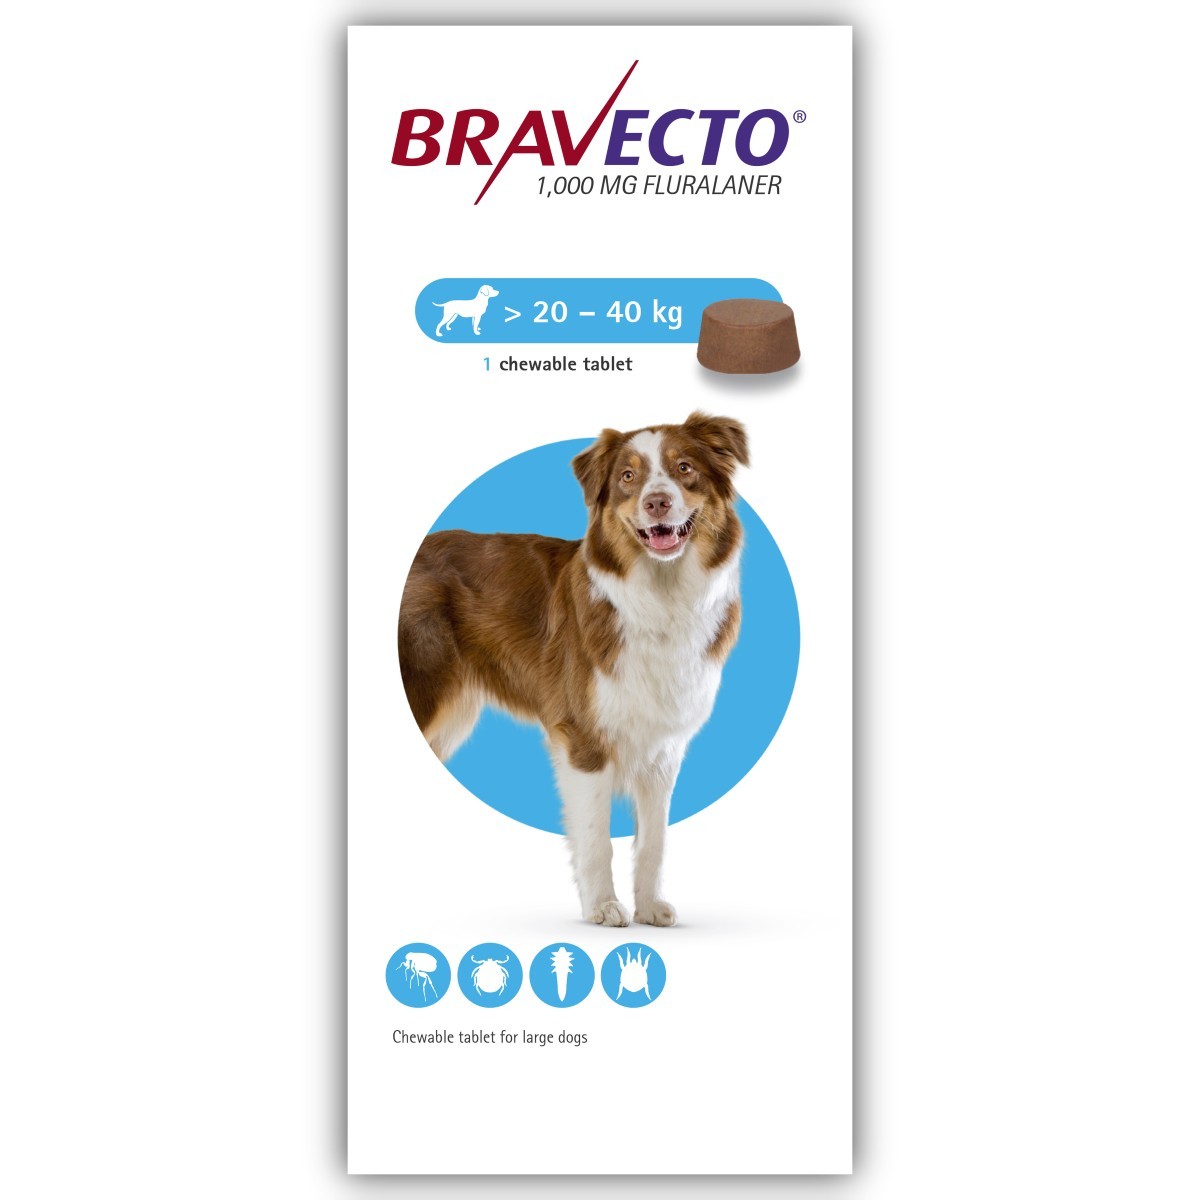 Bravecto 1000mg Chewable Tablets for 